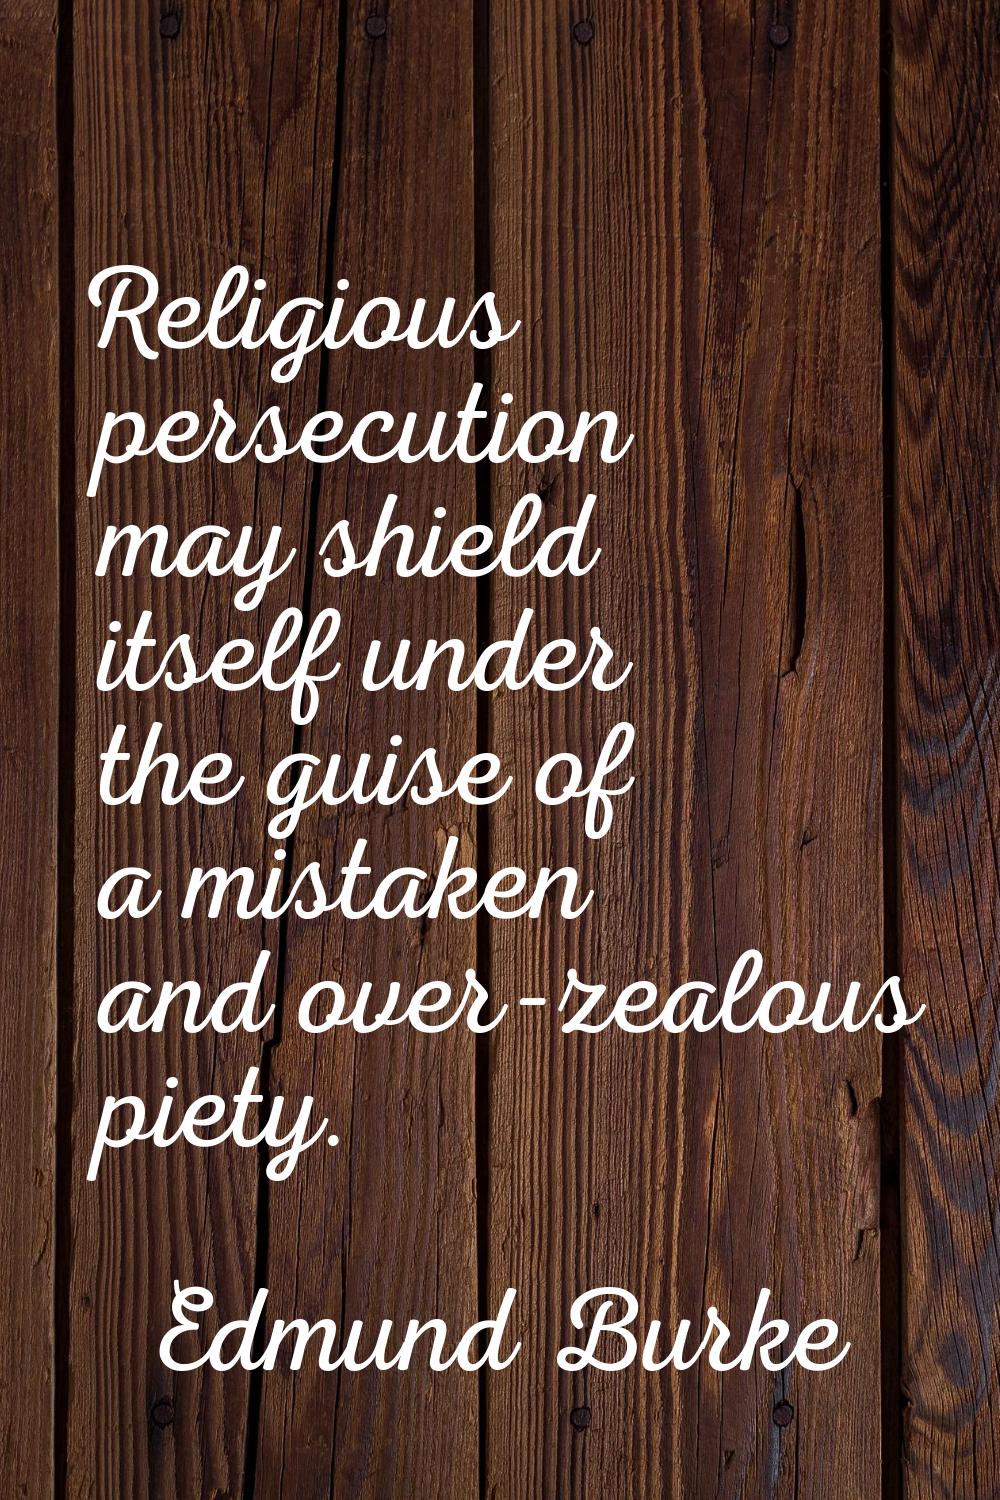 Religious persecution may shield itself under the guise of a mistaken and over-zealous piety.